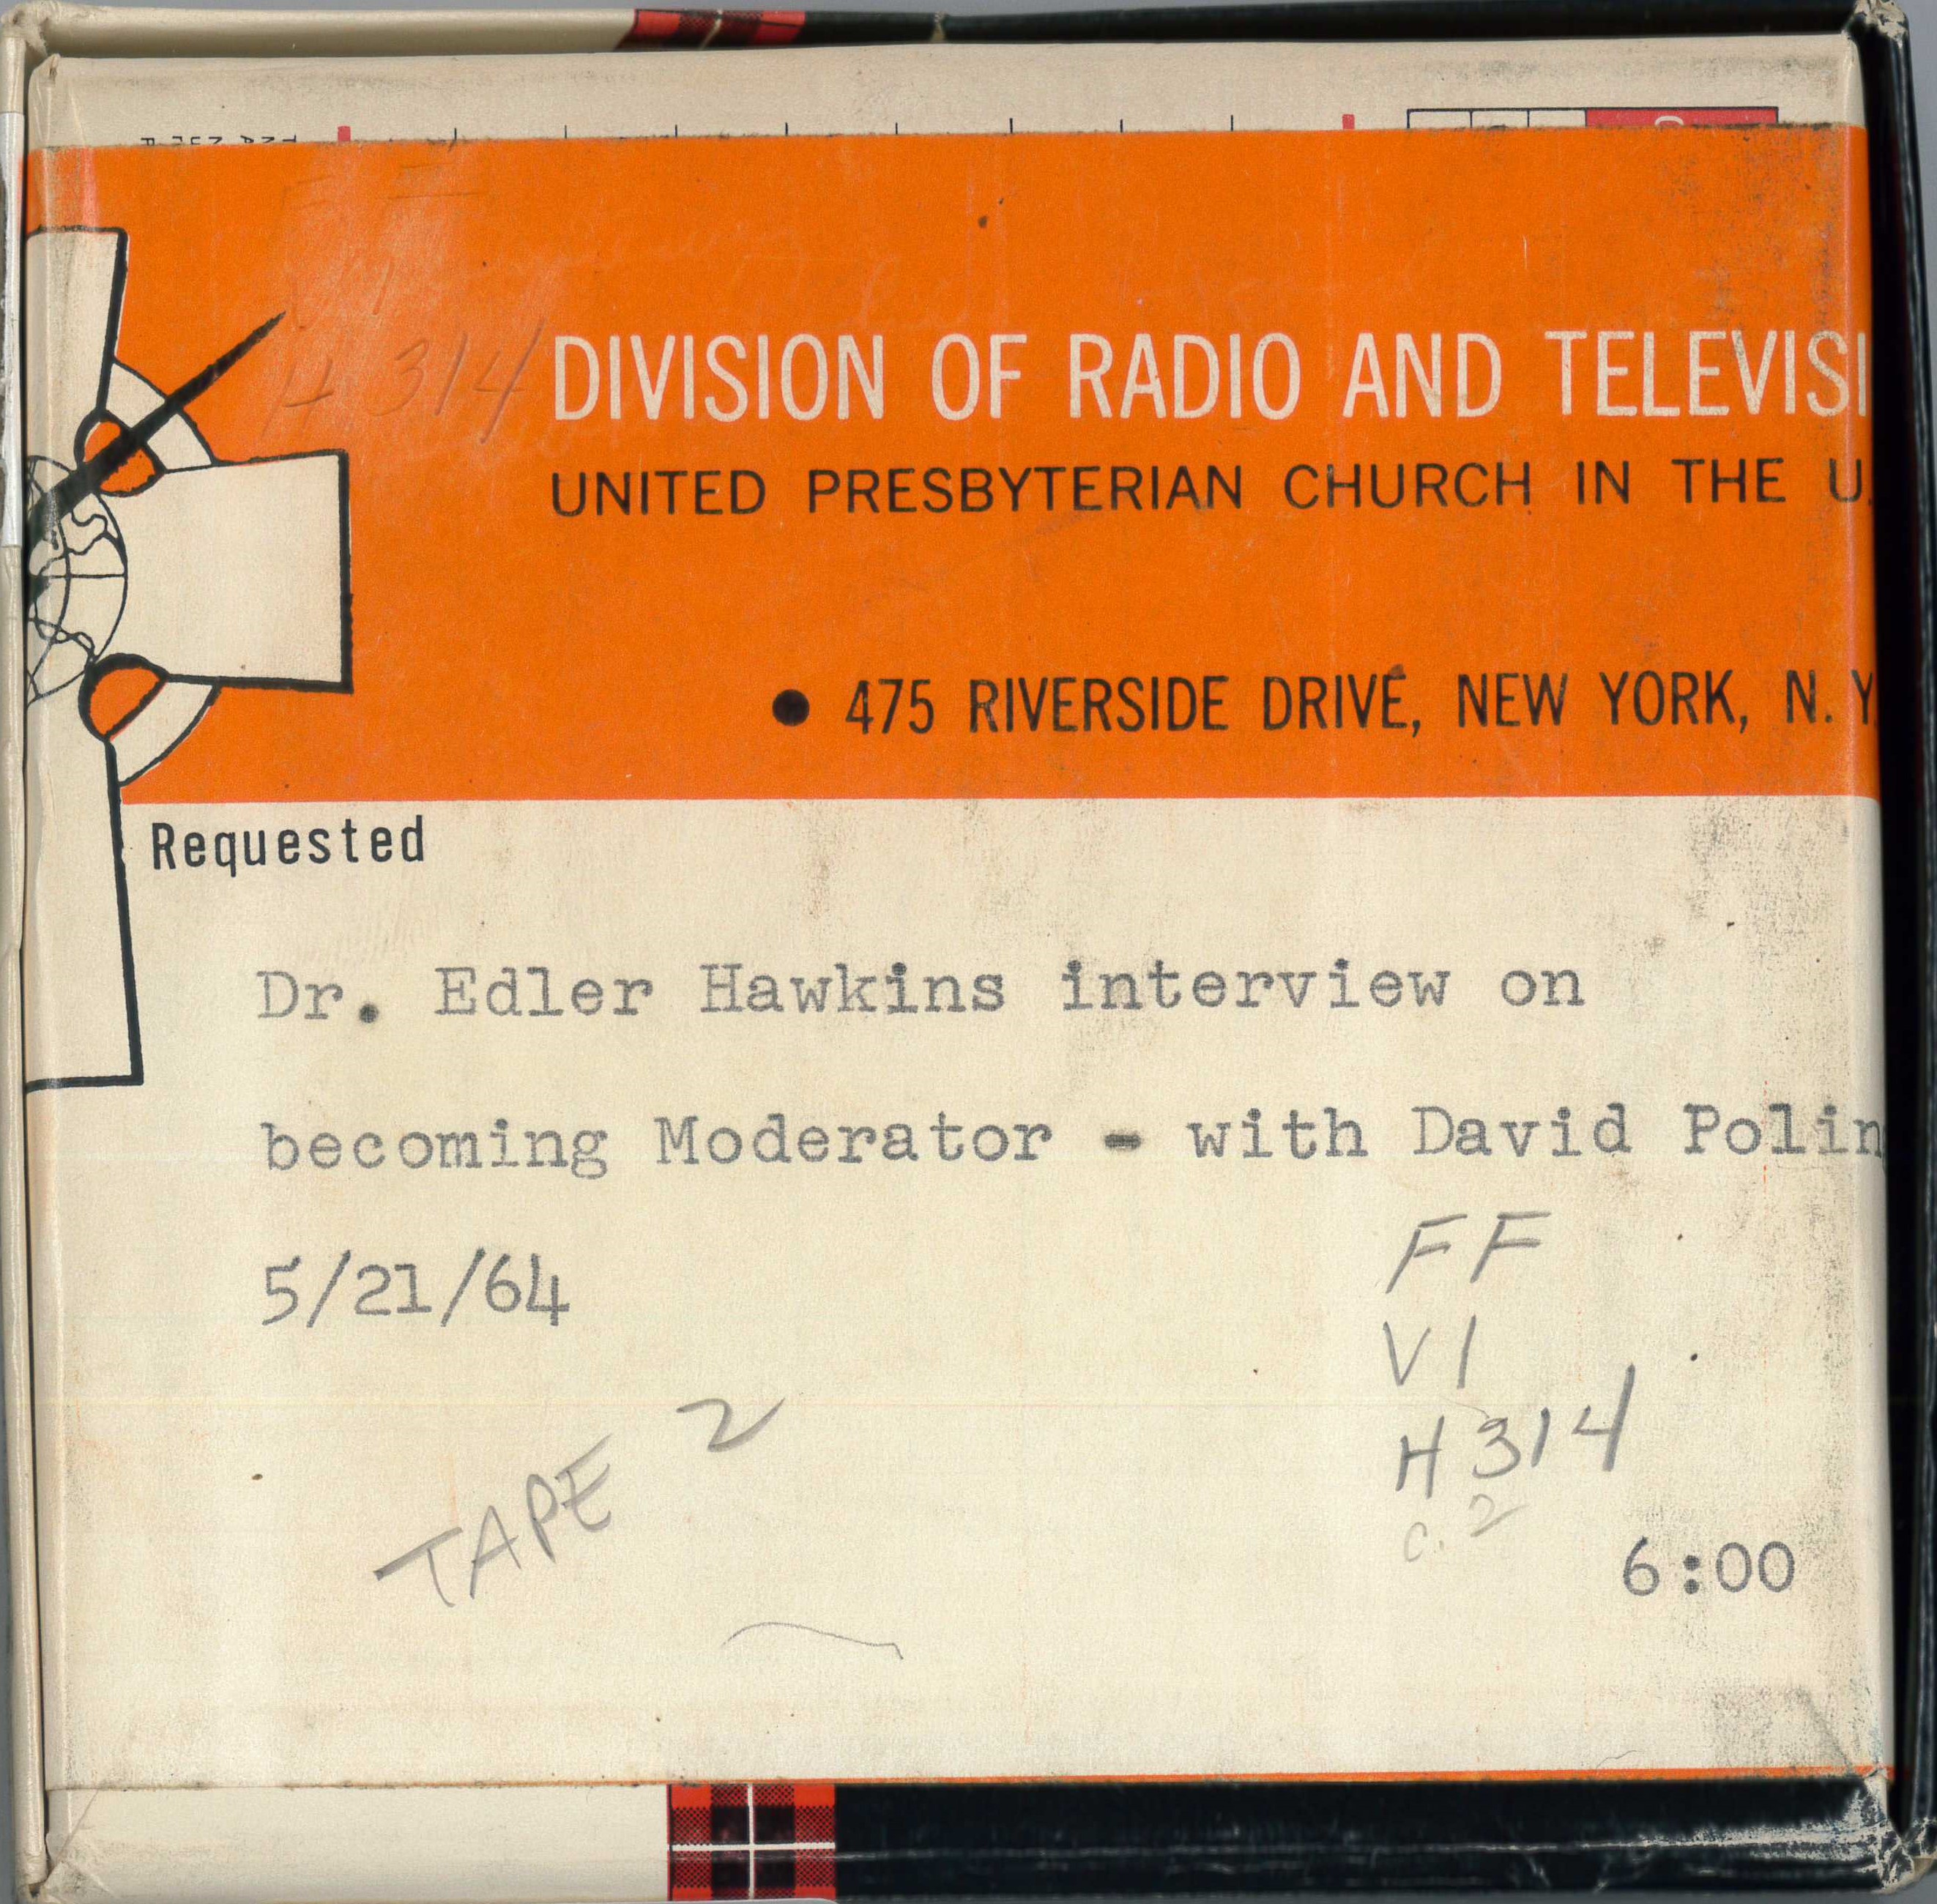 Dr. Edler Hawkins interview on becoming Moderator with David Poling, 1964